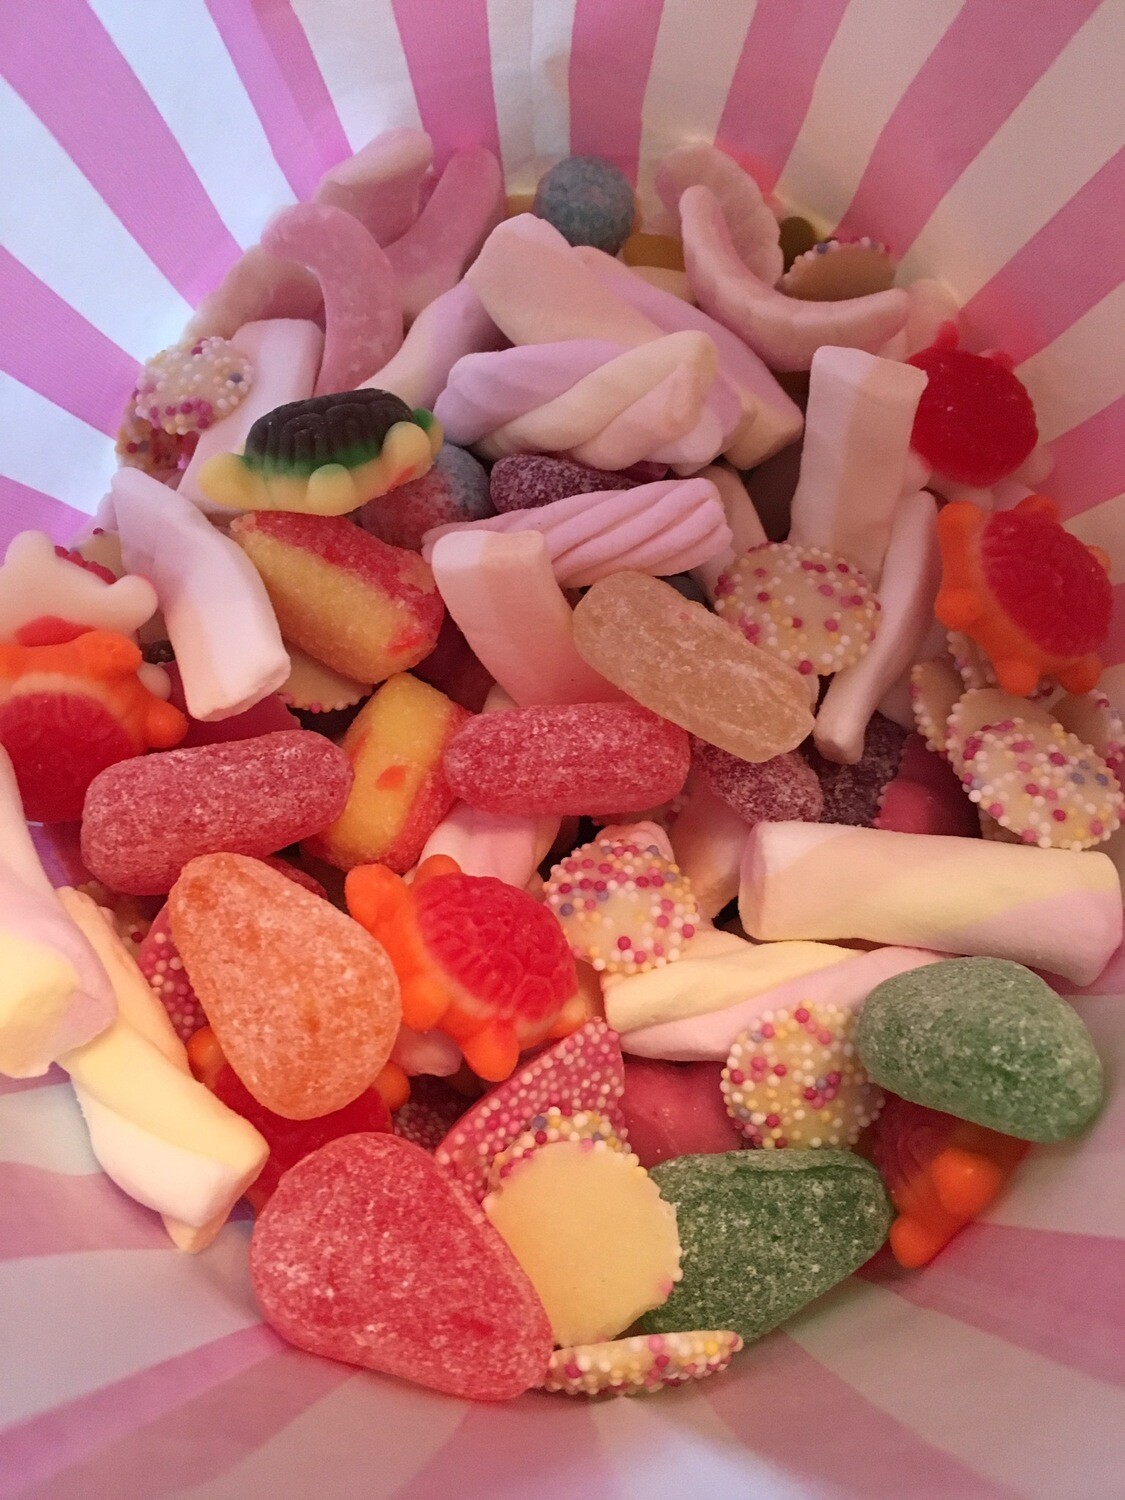 Gluten Free Giant 1.5kg Pick And Mix Bag